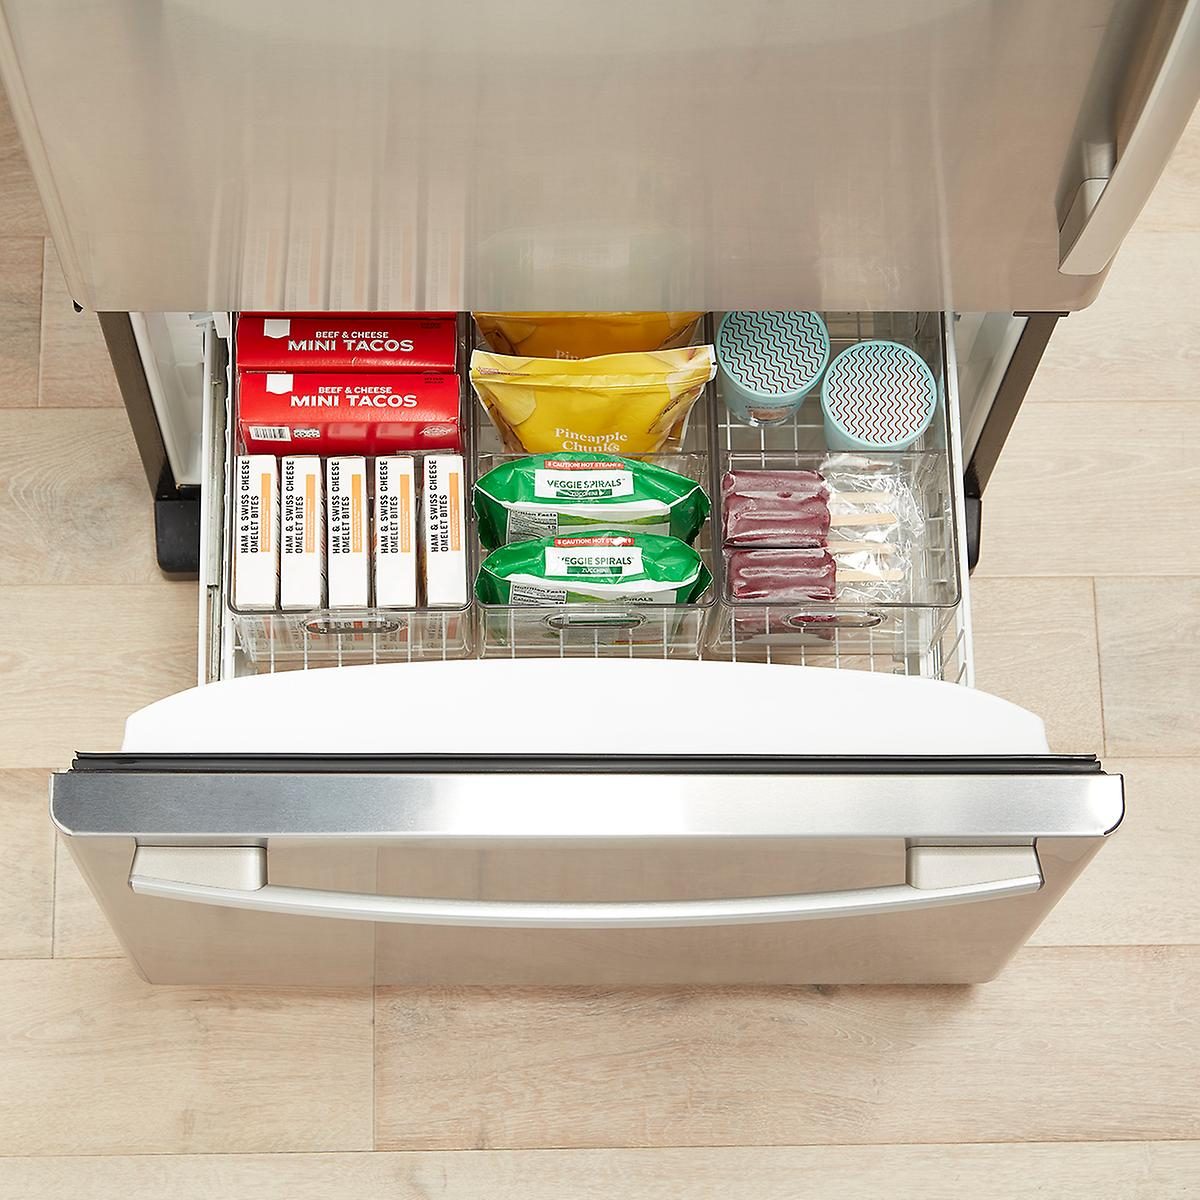 https://www.rd.com/wp-content/uploads/2022/11/freezer-bins-ecomm-via-thecontainerstore-1.jpg?fit=700%2C1024